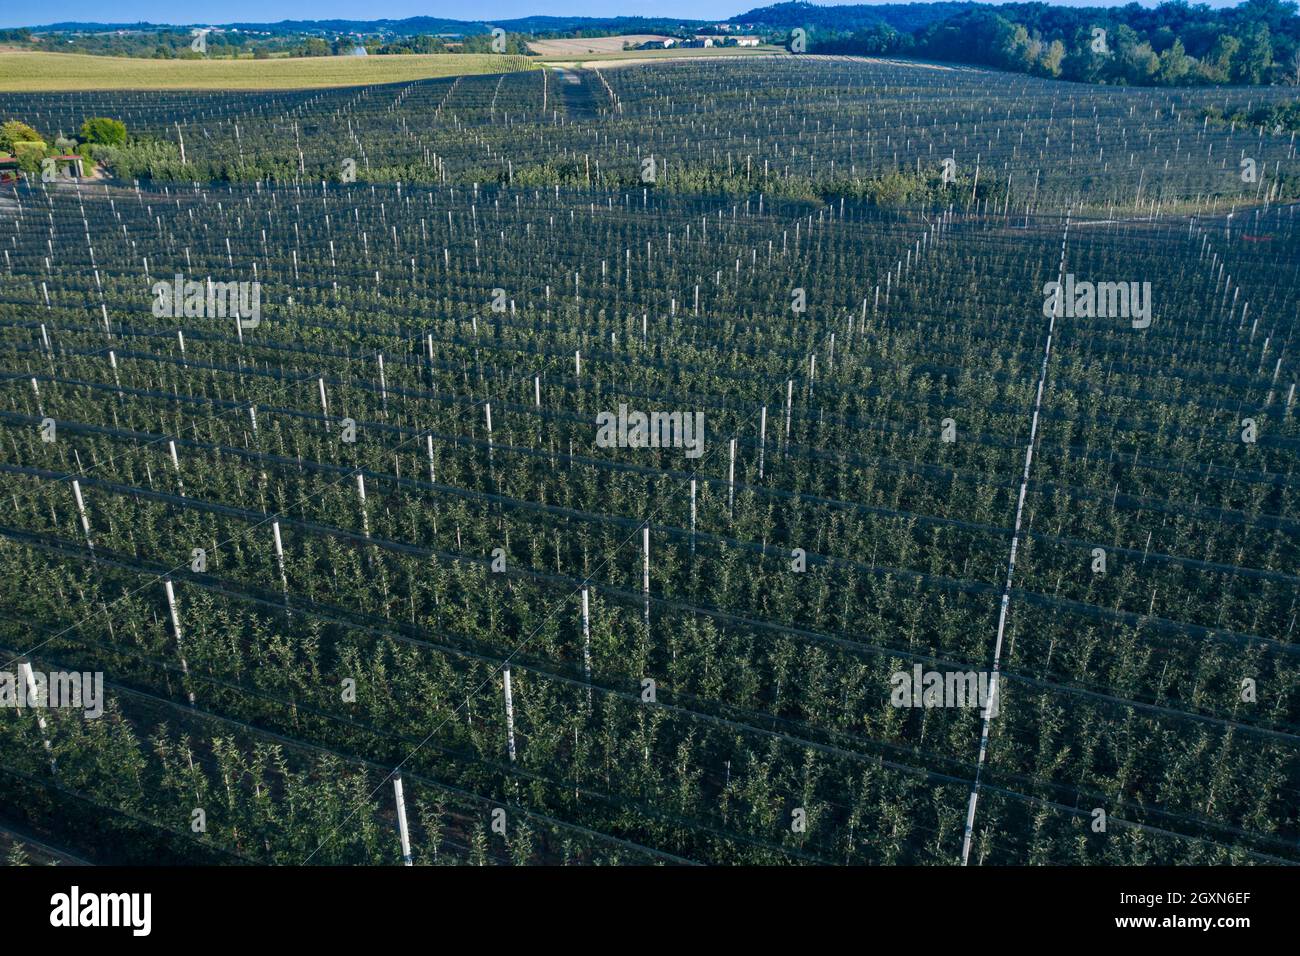 Italy, Orchard Apples with anti-hail nets Stock Photo